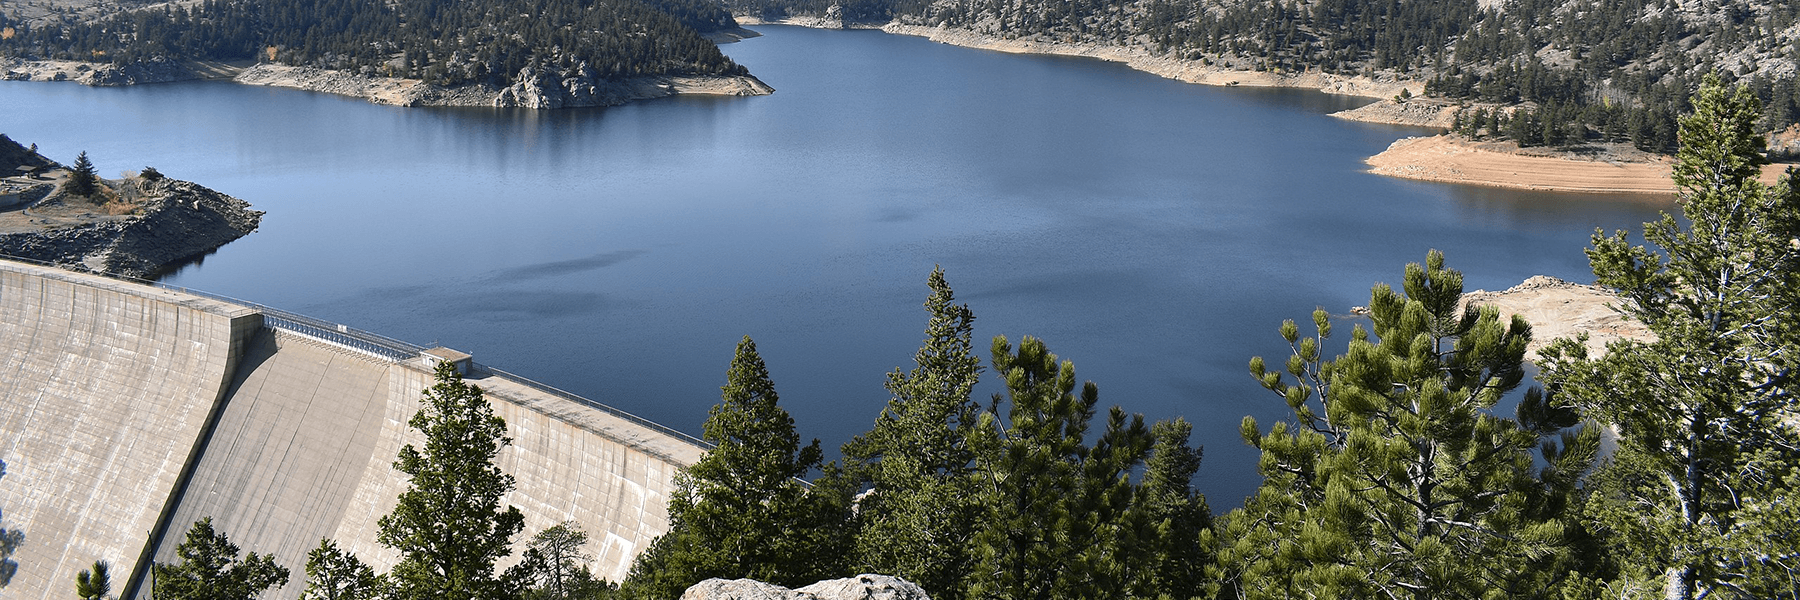 An aerial view of Gross Reservoir in Boulder County, CO